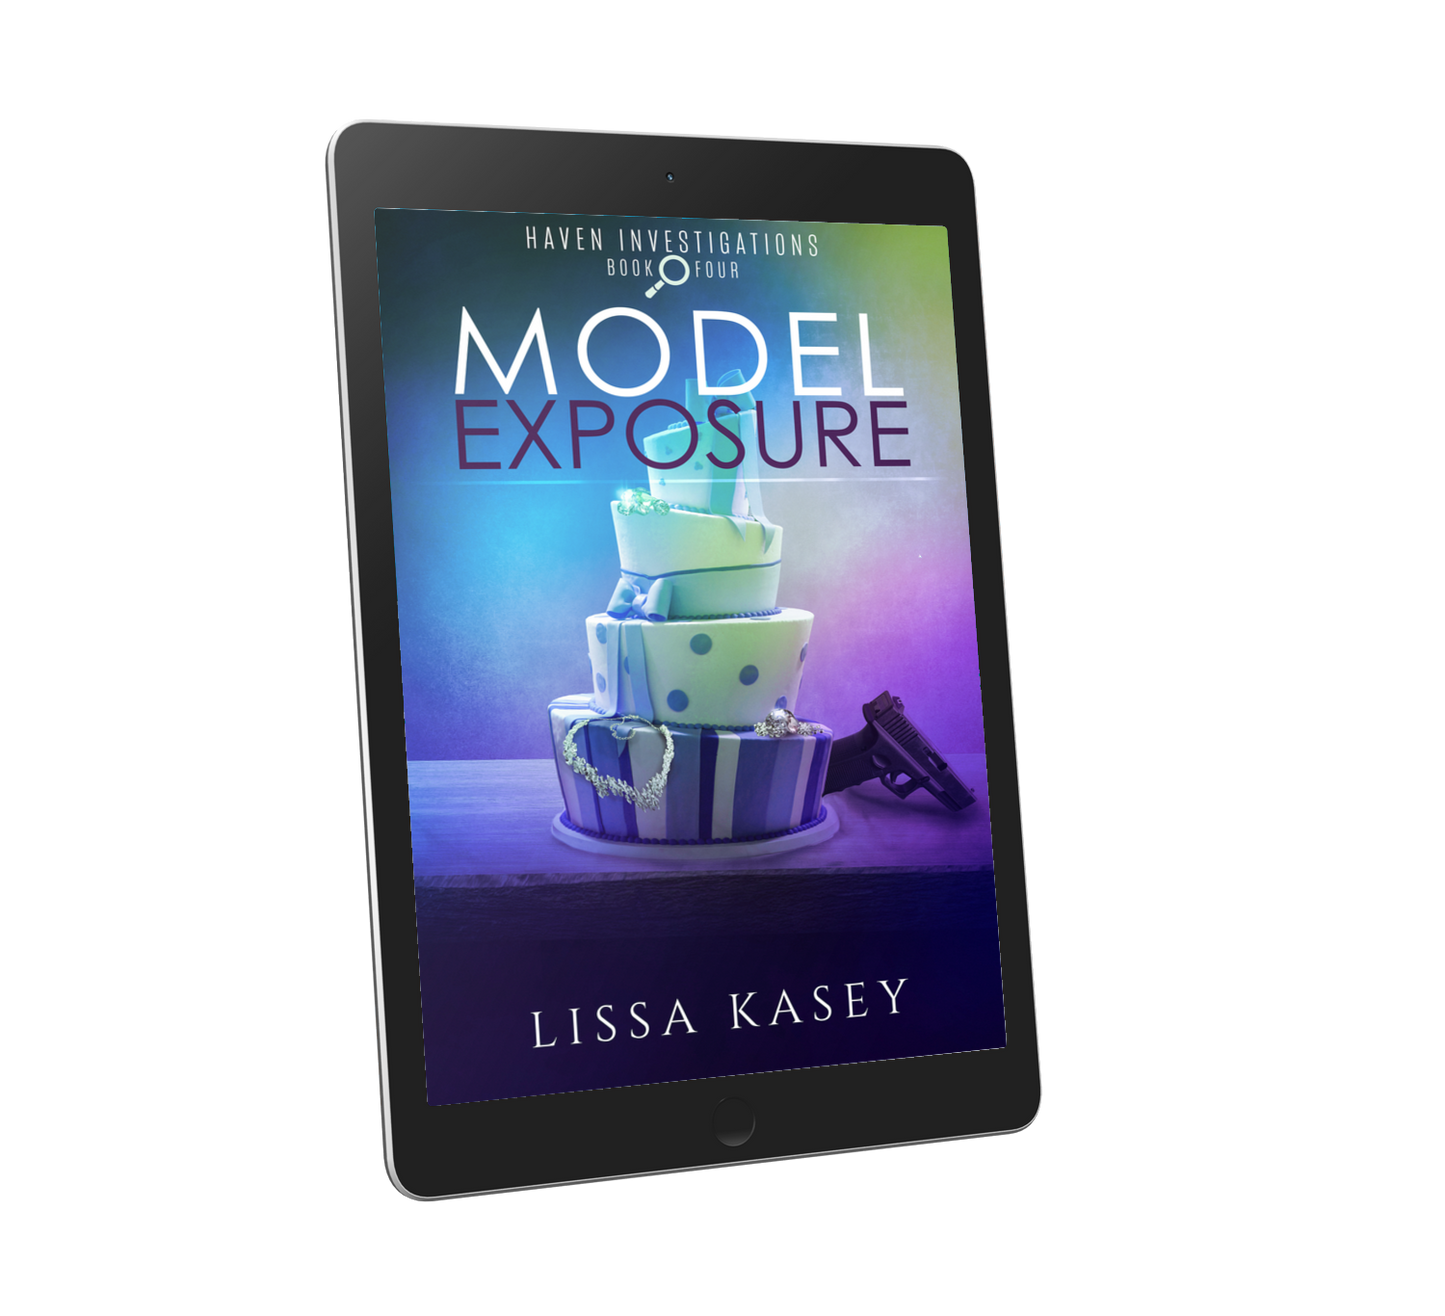 Model Exposure by Lissa Kasey Haven Investigations Book Four Ebook